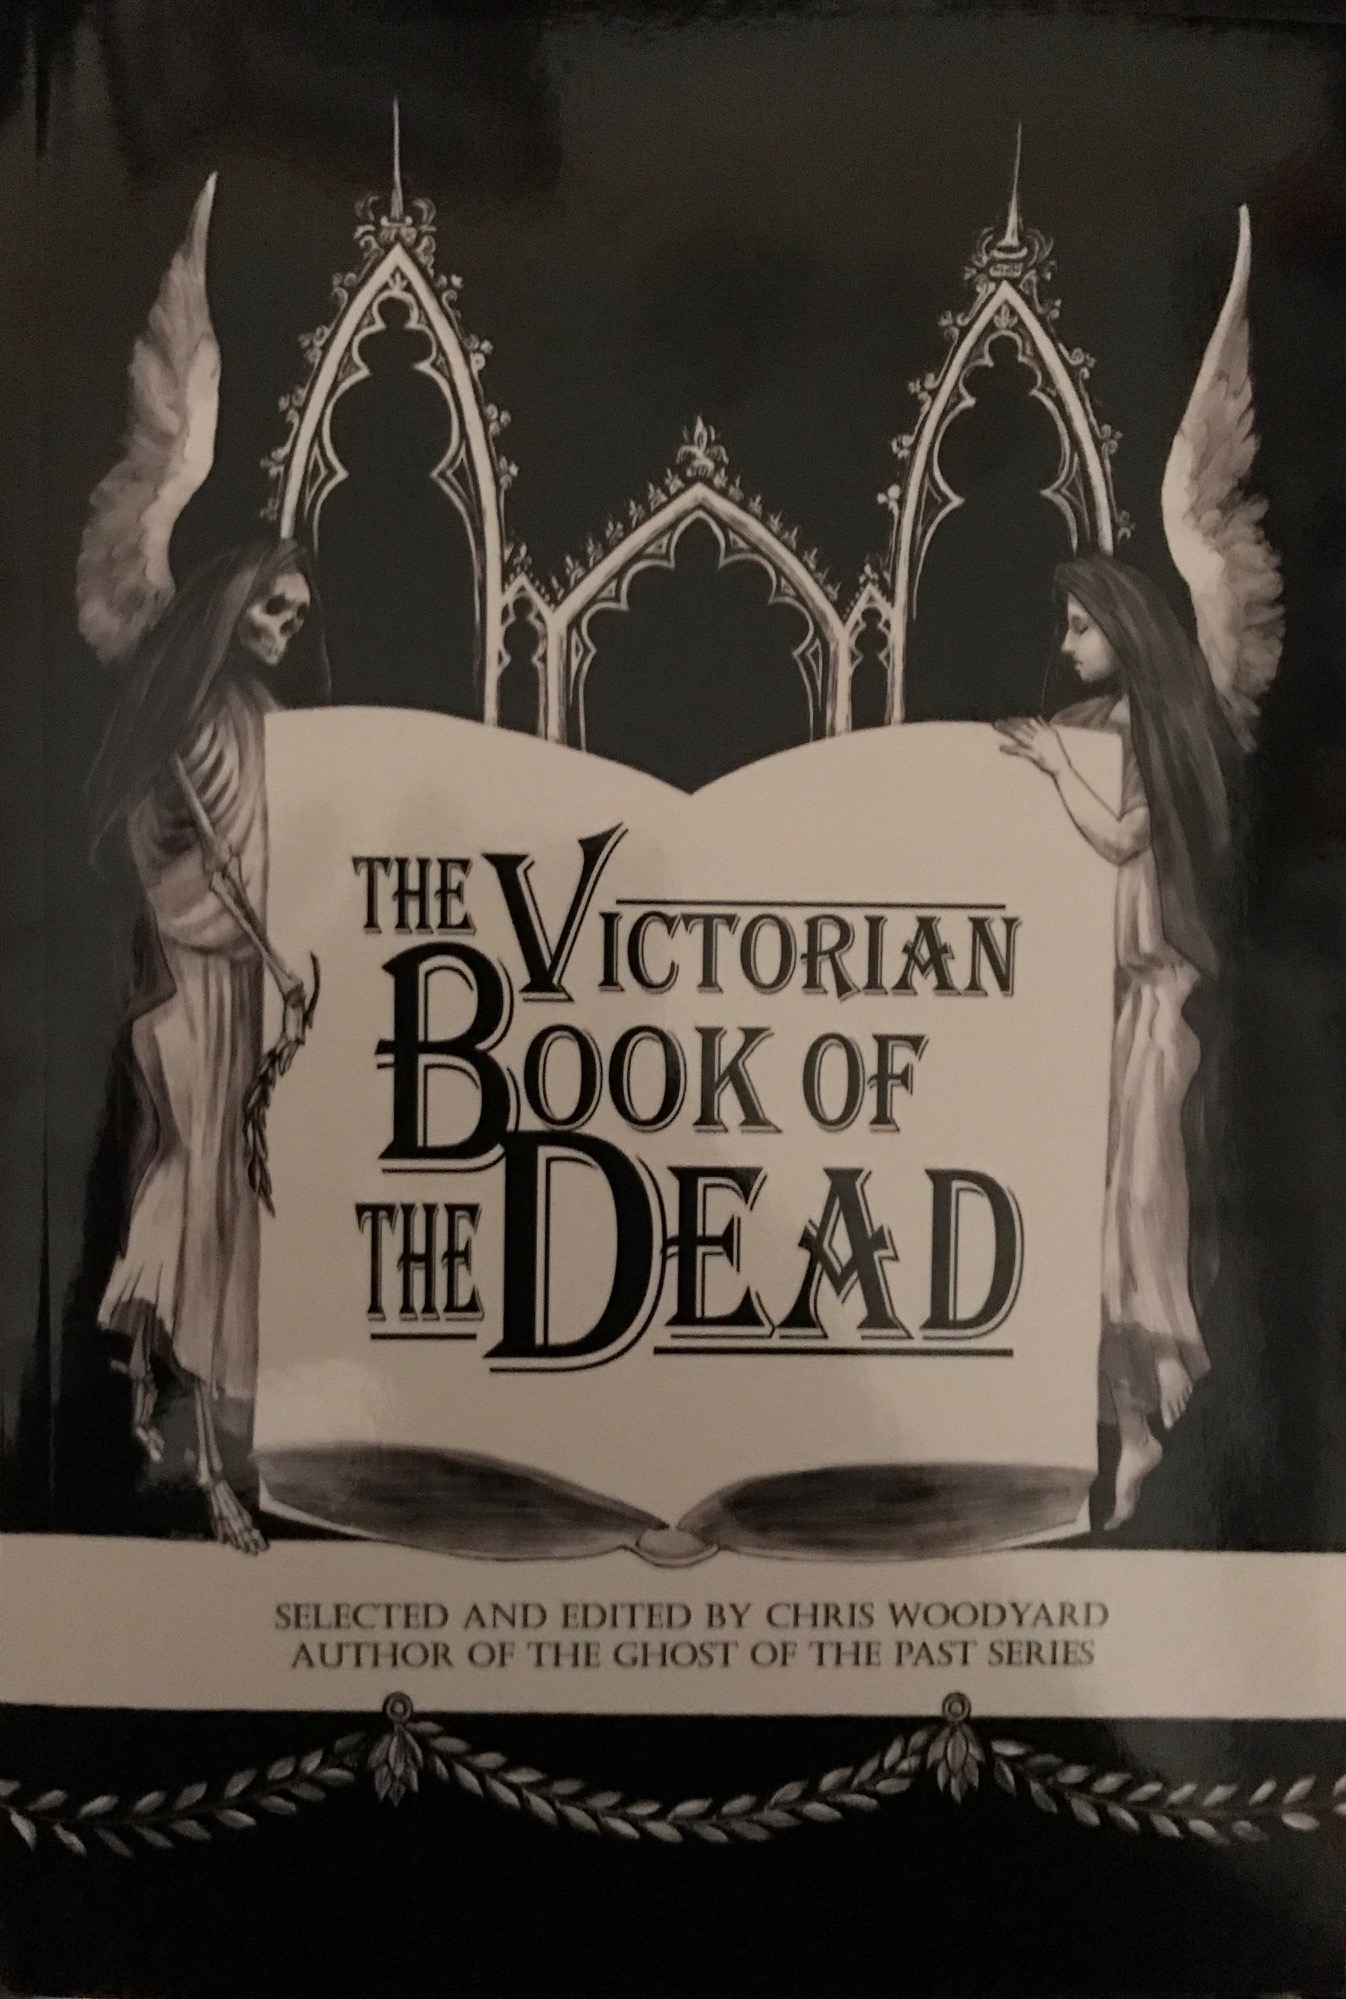 The body snatching article comes from The Victorian Book of the Dead, by Chris Woodyard